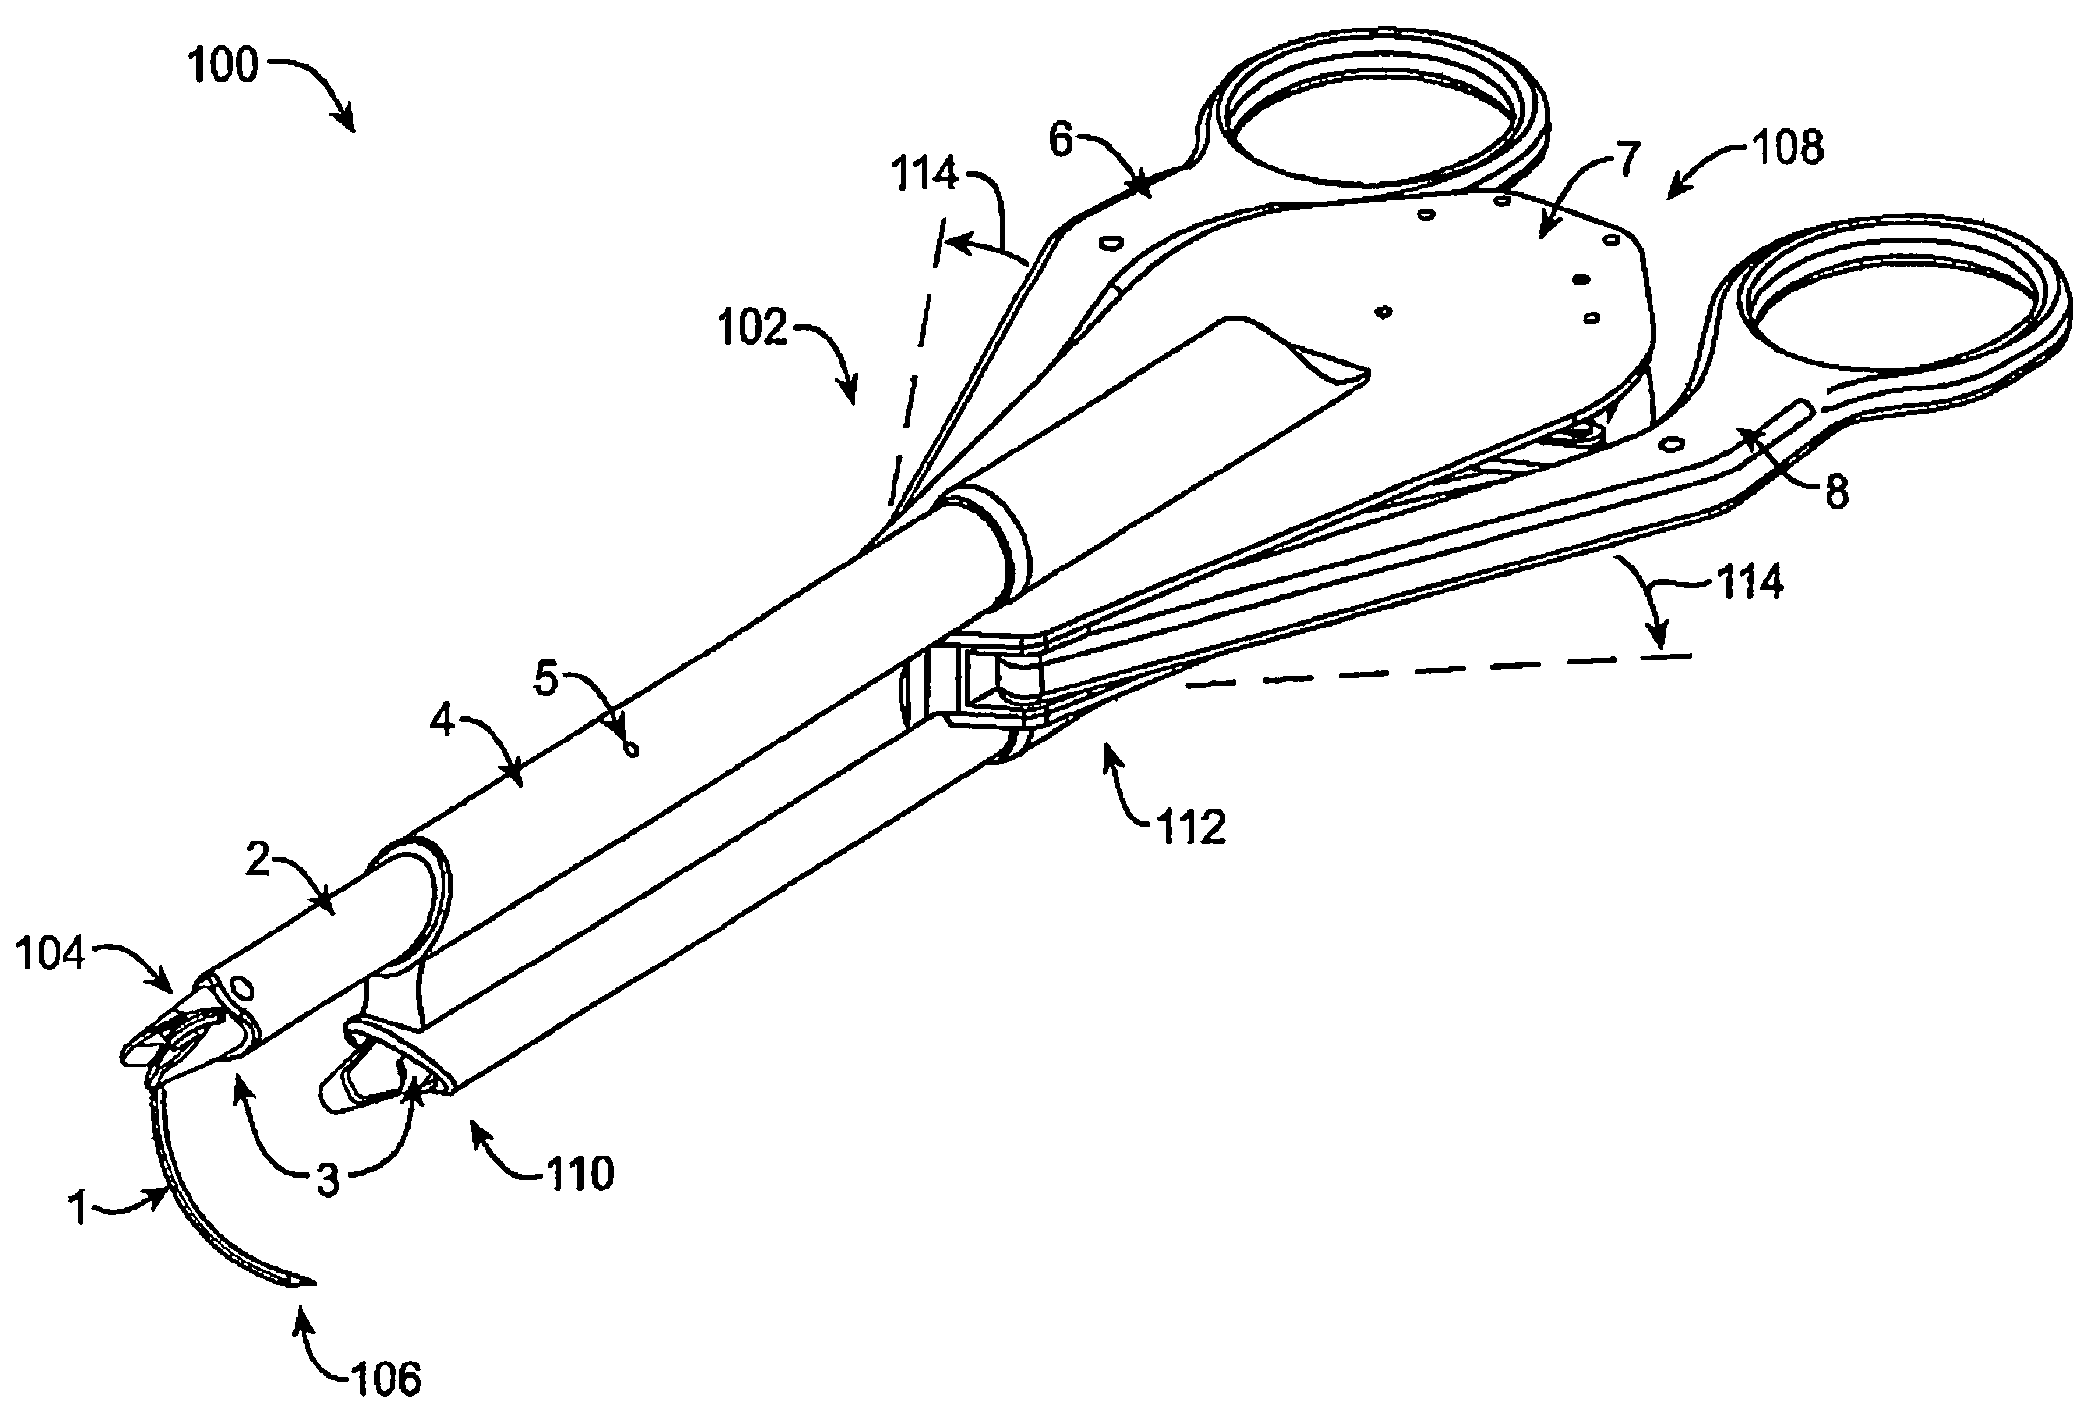 Suturing device, system and method